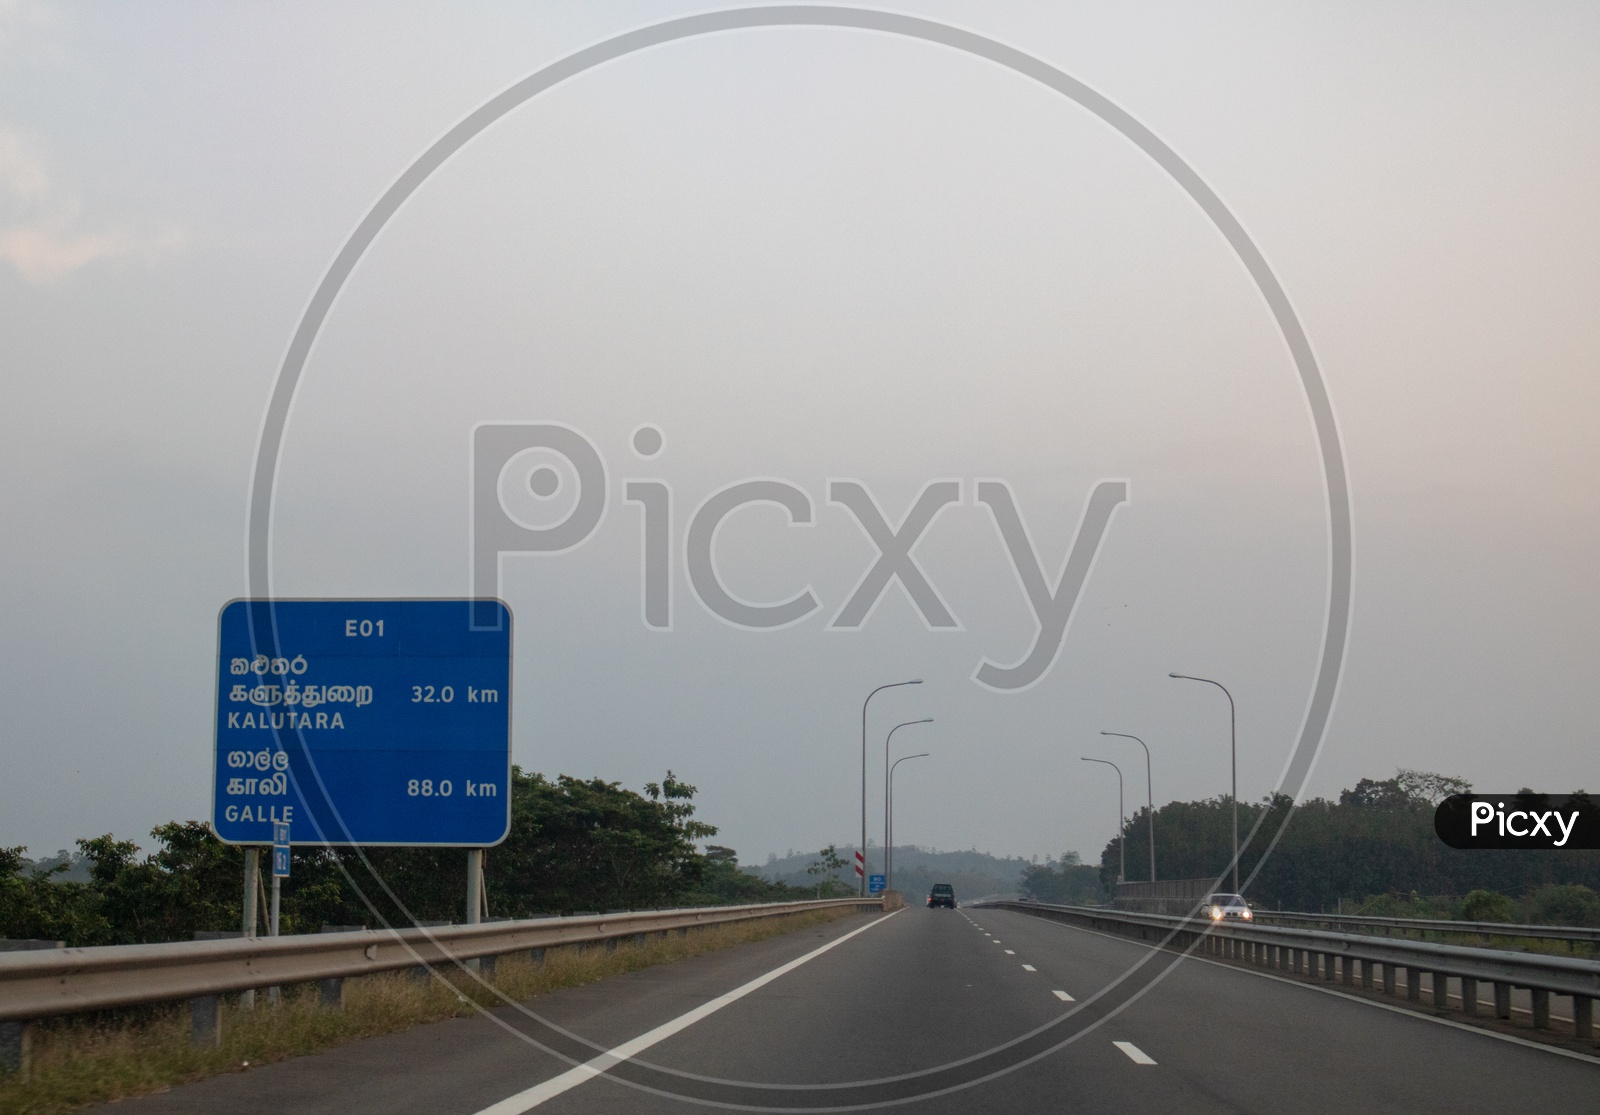 Southern Expressway to Kalutara and Galle